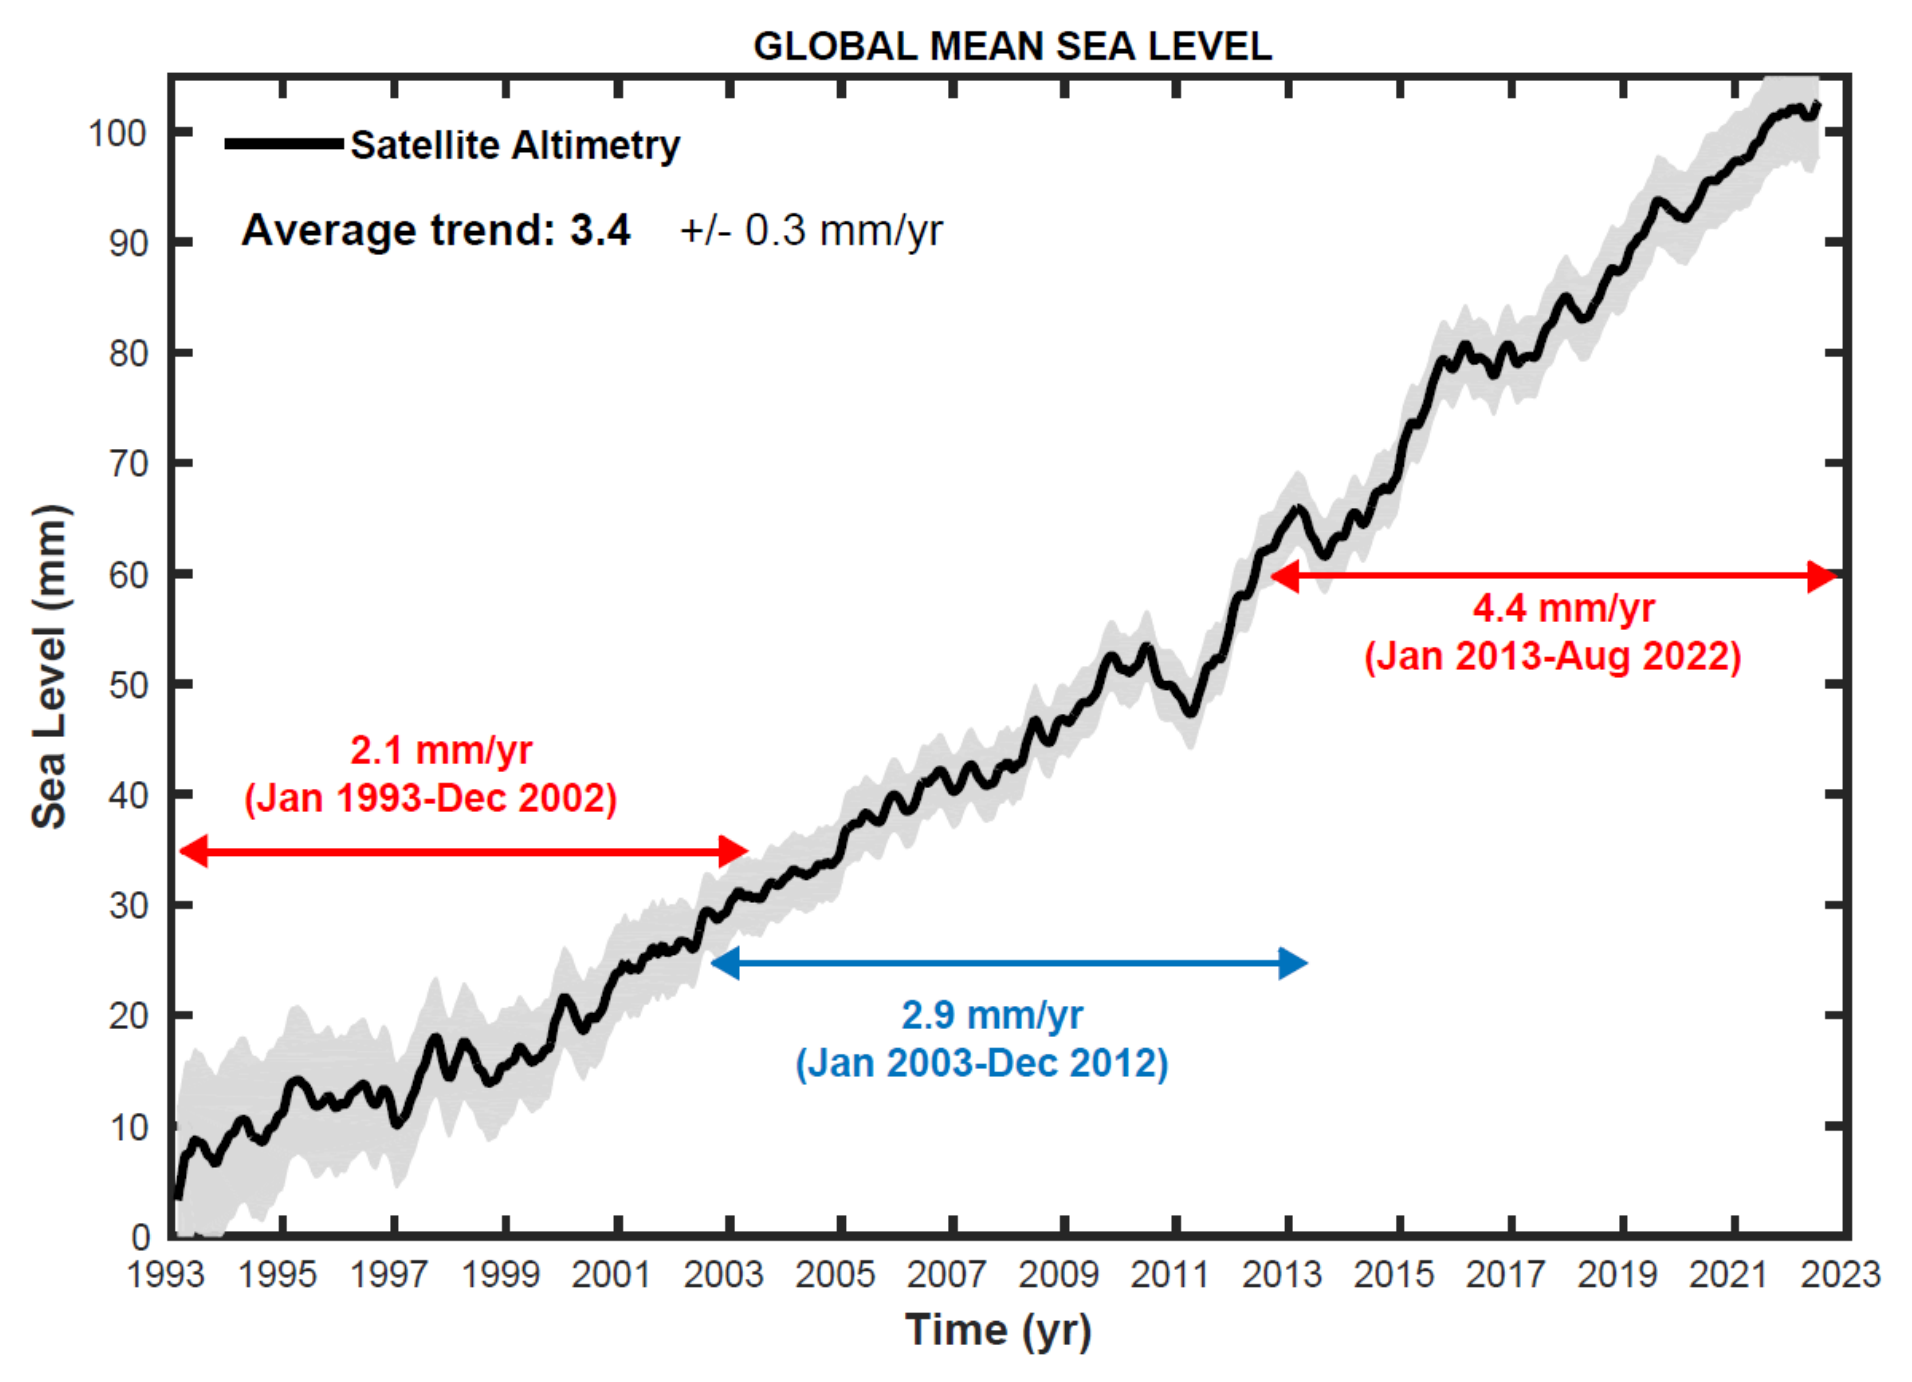 Global mean sea level evolution, January 1993 - August 2022 (black curve) with associated uncertainty (shaded area) The horizontal, coloured straight lines represent the average linear trends over three successive time spans. In 2022, global mean sea level (GMSL) continued to rise. The GMSL rise is estimated to be 3.4 ± 0.3 mm·yr -1 over the 30 years (1993-2022) of the satellite altimeter record, but the rate has doubled between the first decade of the record (1993-2002) and the last (2013-2022) during which the rate has exceeded 4.4 mm·yr -1. The GMSL acceleration is estimated to be 0.12 ± 0.05 mm·yr -2 over the 30-year period. GMSL increased by about 5 mm between January 2021 and August 2022. Since January 2020, the increase in GMSL amounts to around 10 mm, a substantial fraction of the GMSL rise since 1993 (around 100 mm), despite the ongoing La Niña. Date: LEGOS / AVISO altimetry www.aviso.altimetry.fr. Graphic: WMO